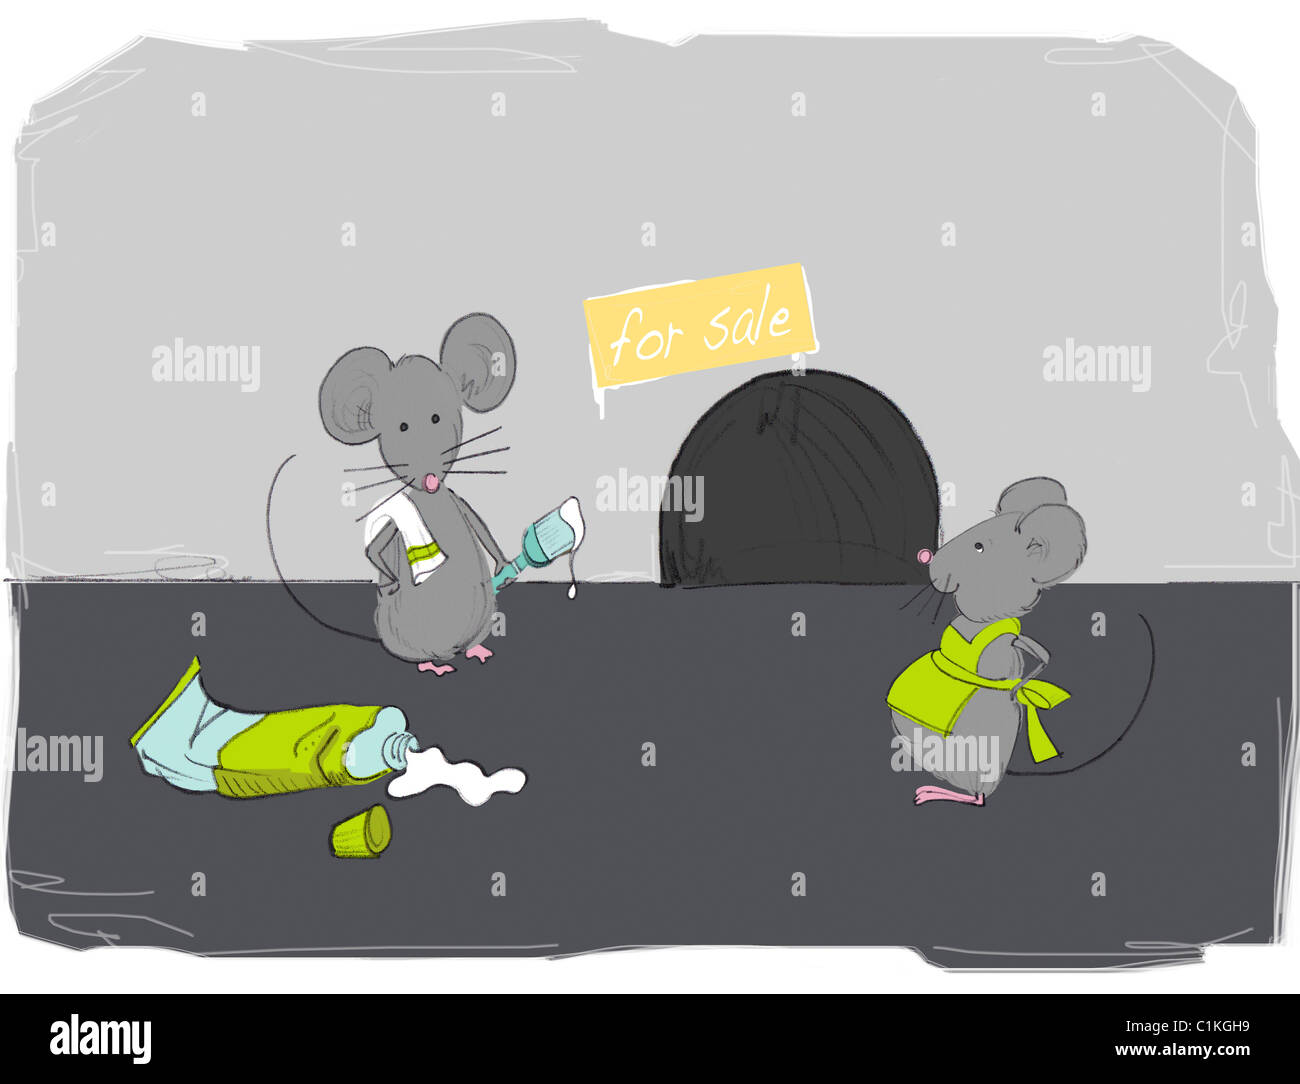 Illustration of Mice Gettting ready to Sell Home Stock Photo